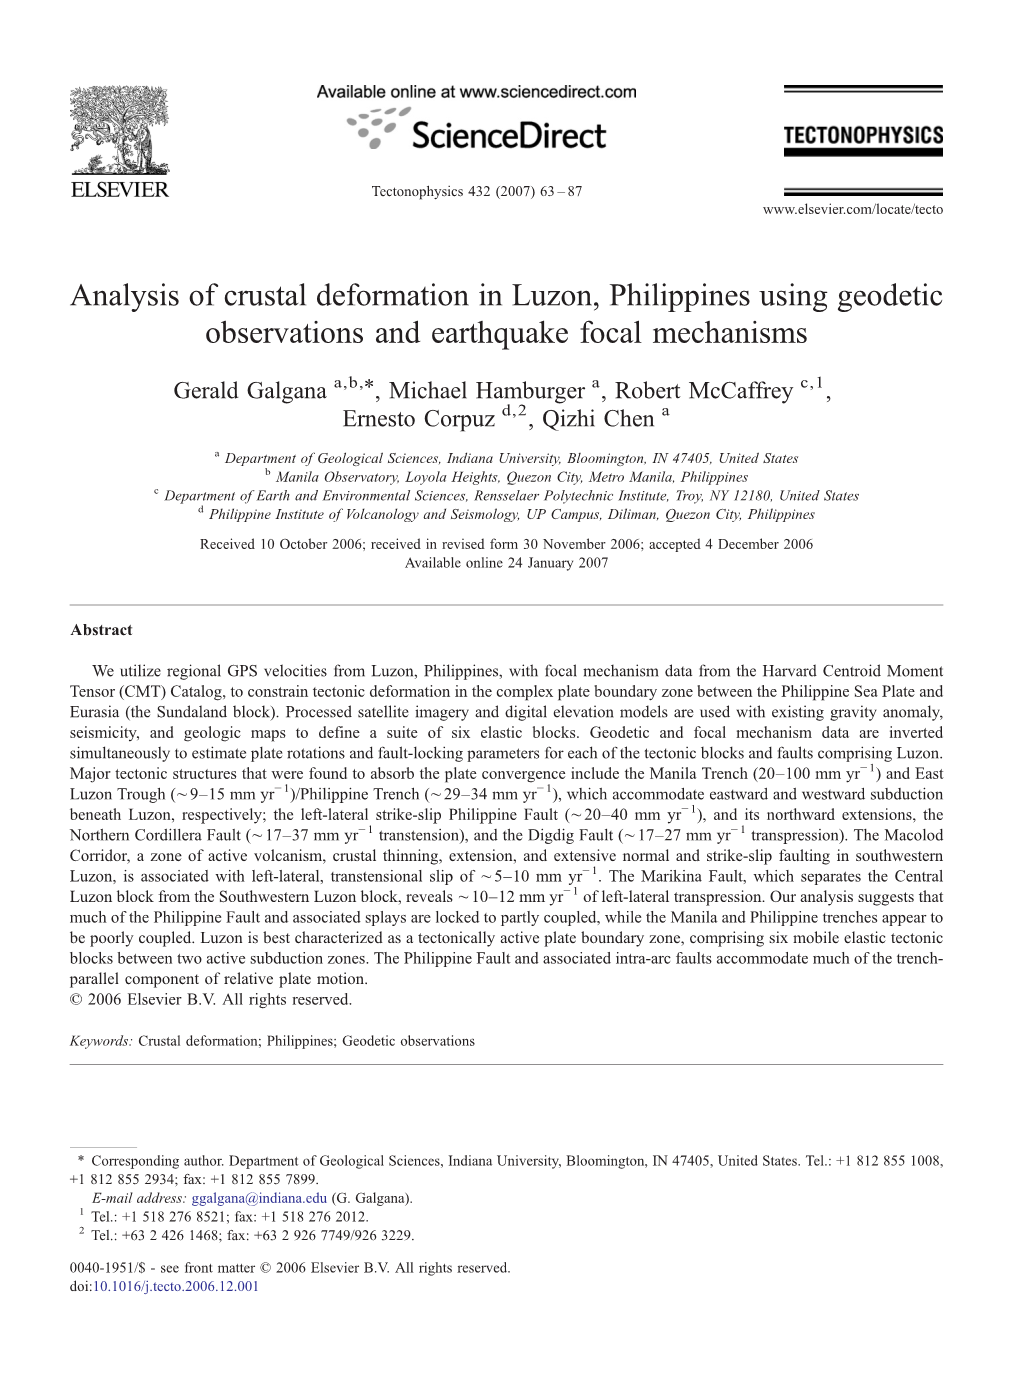 Analysis of Crustal Deformation in Luzon, Philippines Using Geodetic